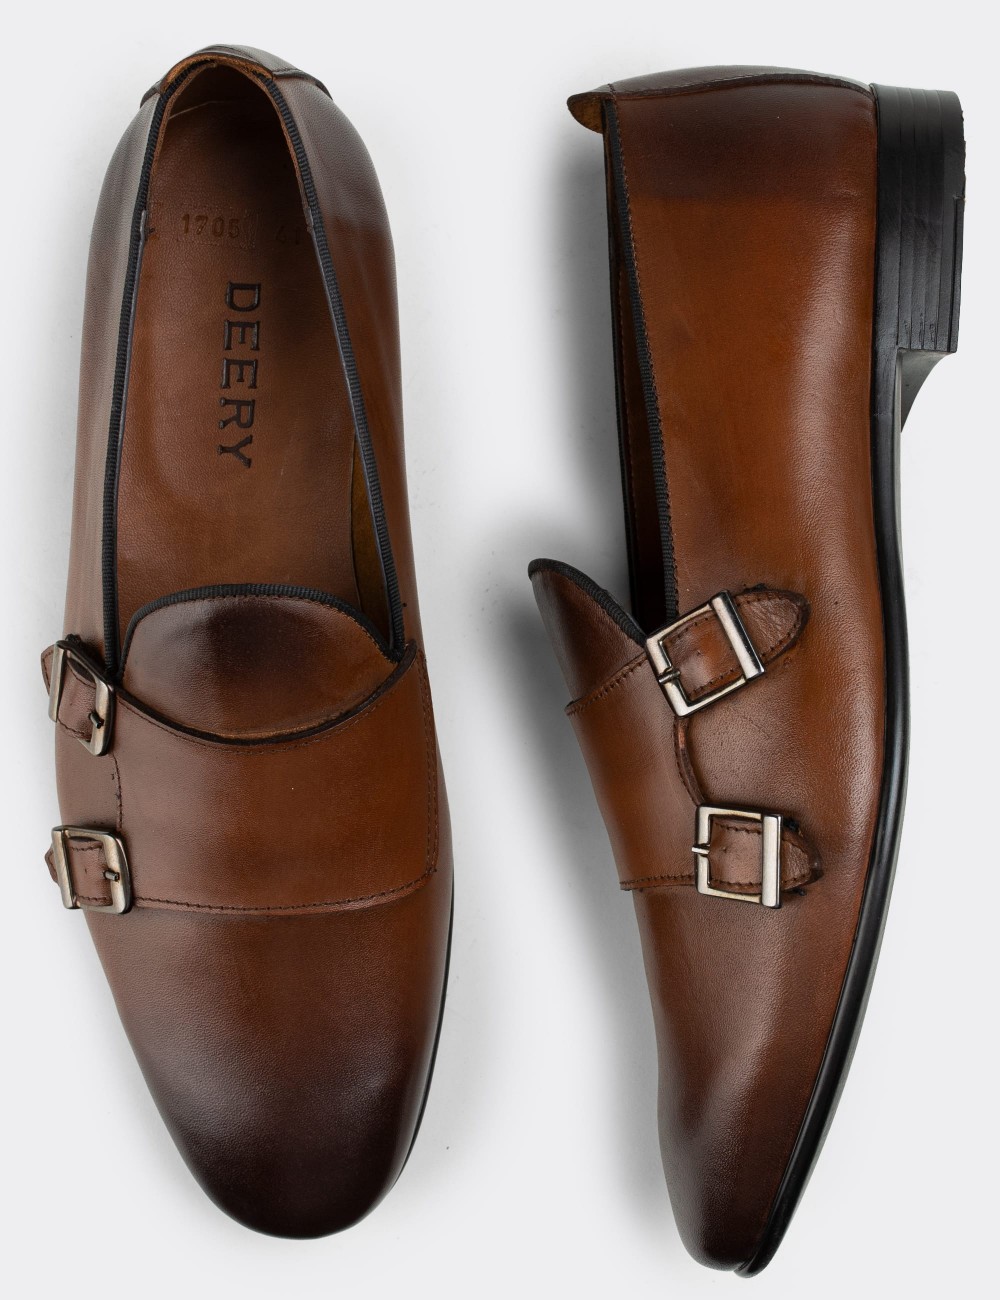 Tan  Leather Monk-Strap Loafers - 01705MTBAC05